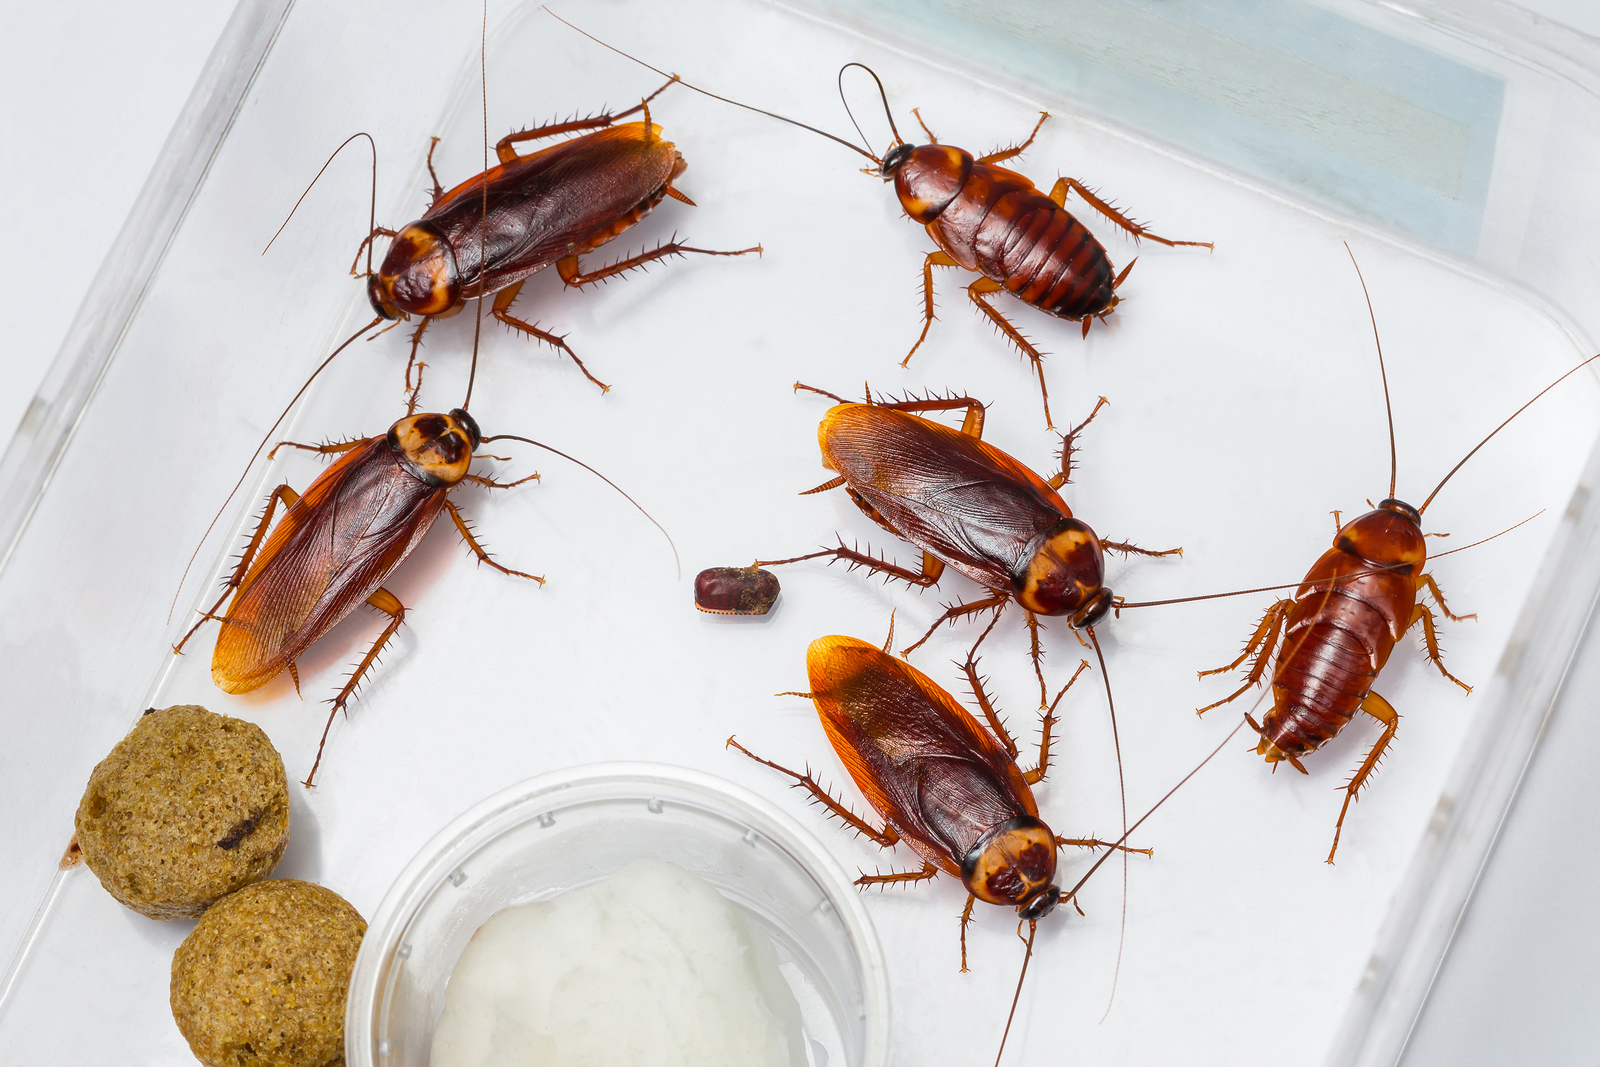 What Do Cockroaches Eat and Where Do They Live When There are No Houses  Around?